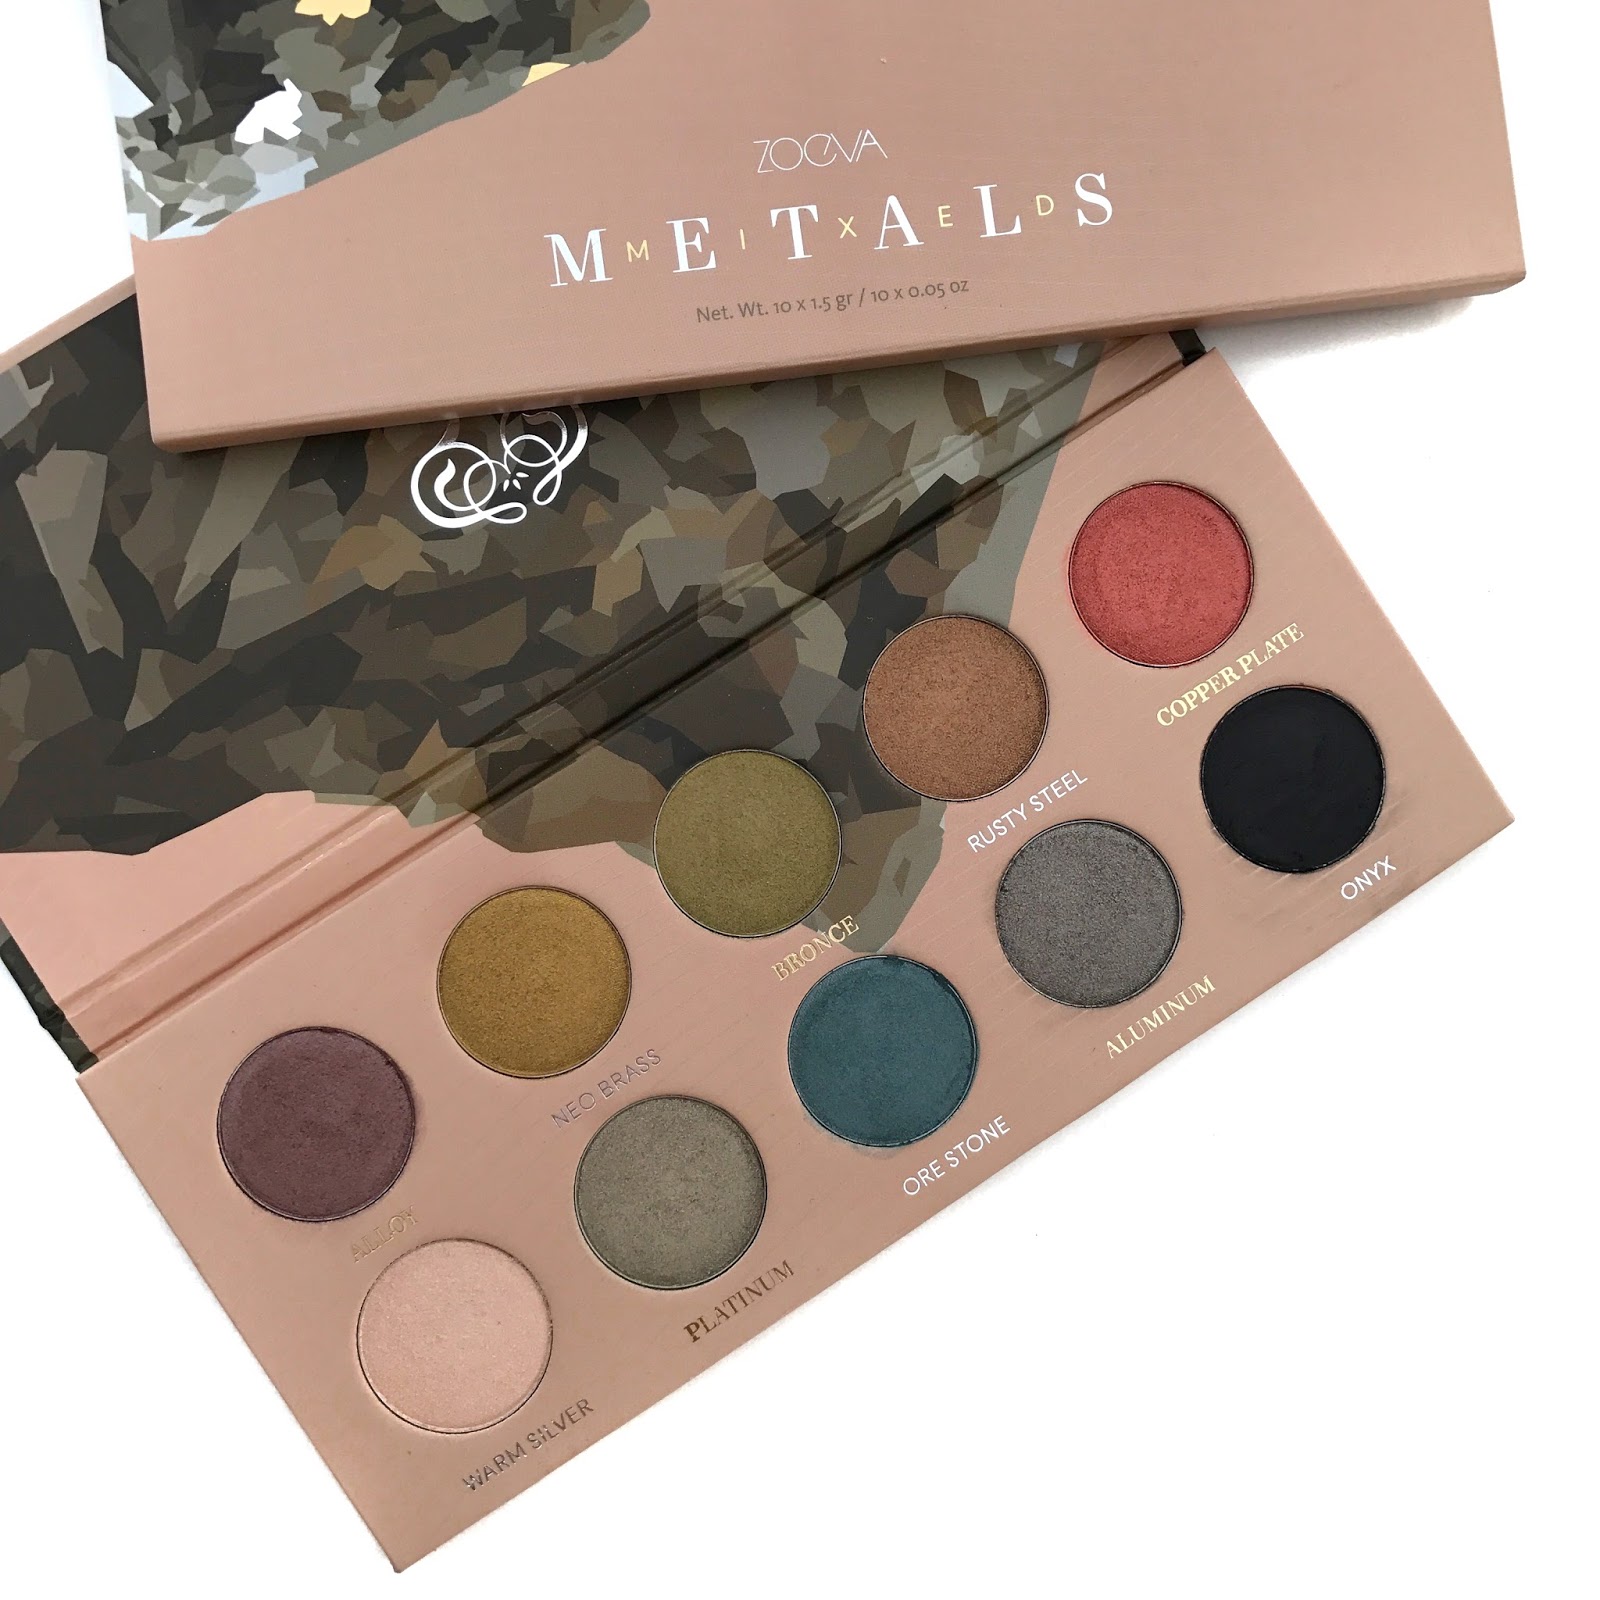 Review and Swatches: Zoeva Mixed Metals - Wellness by Kels